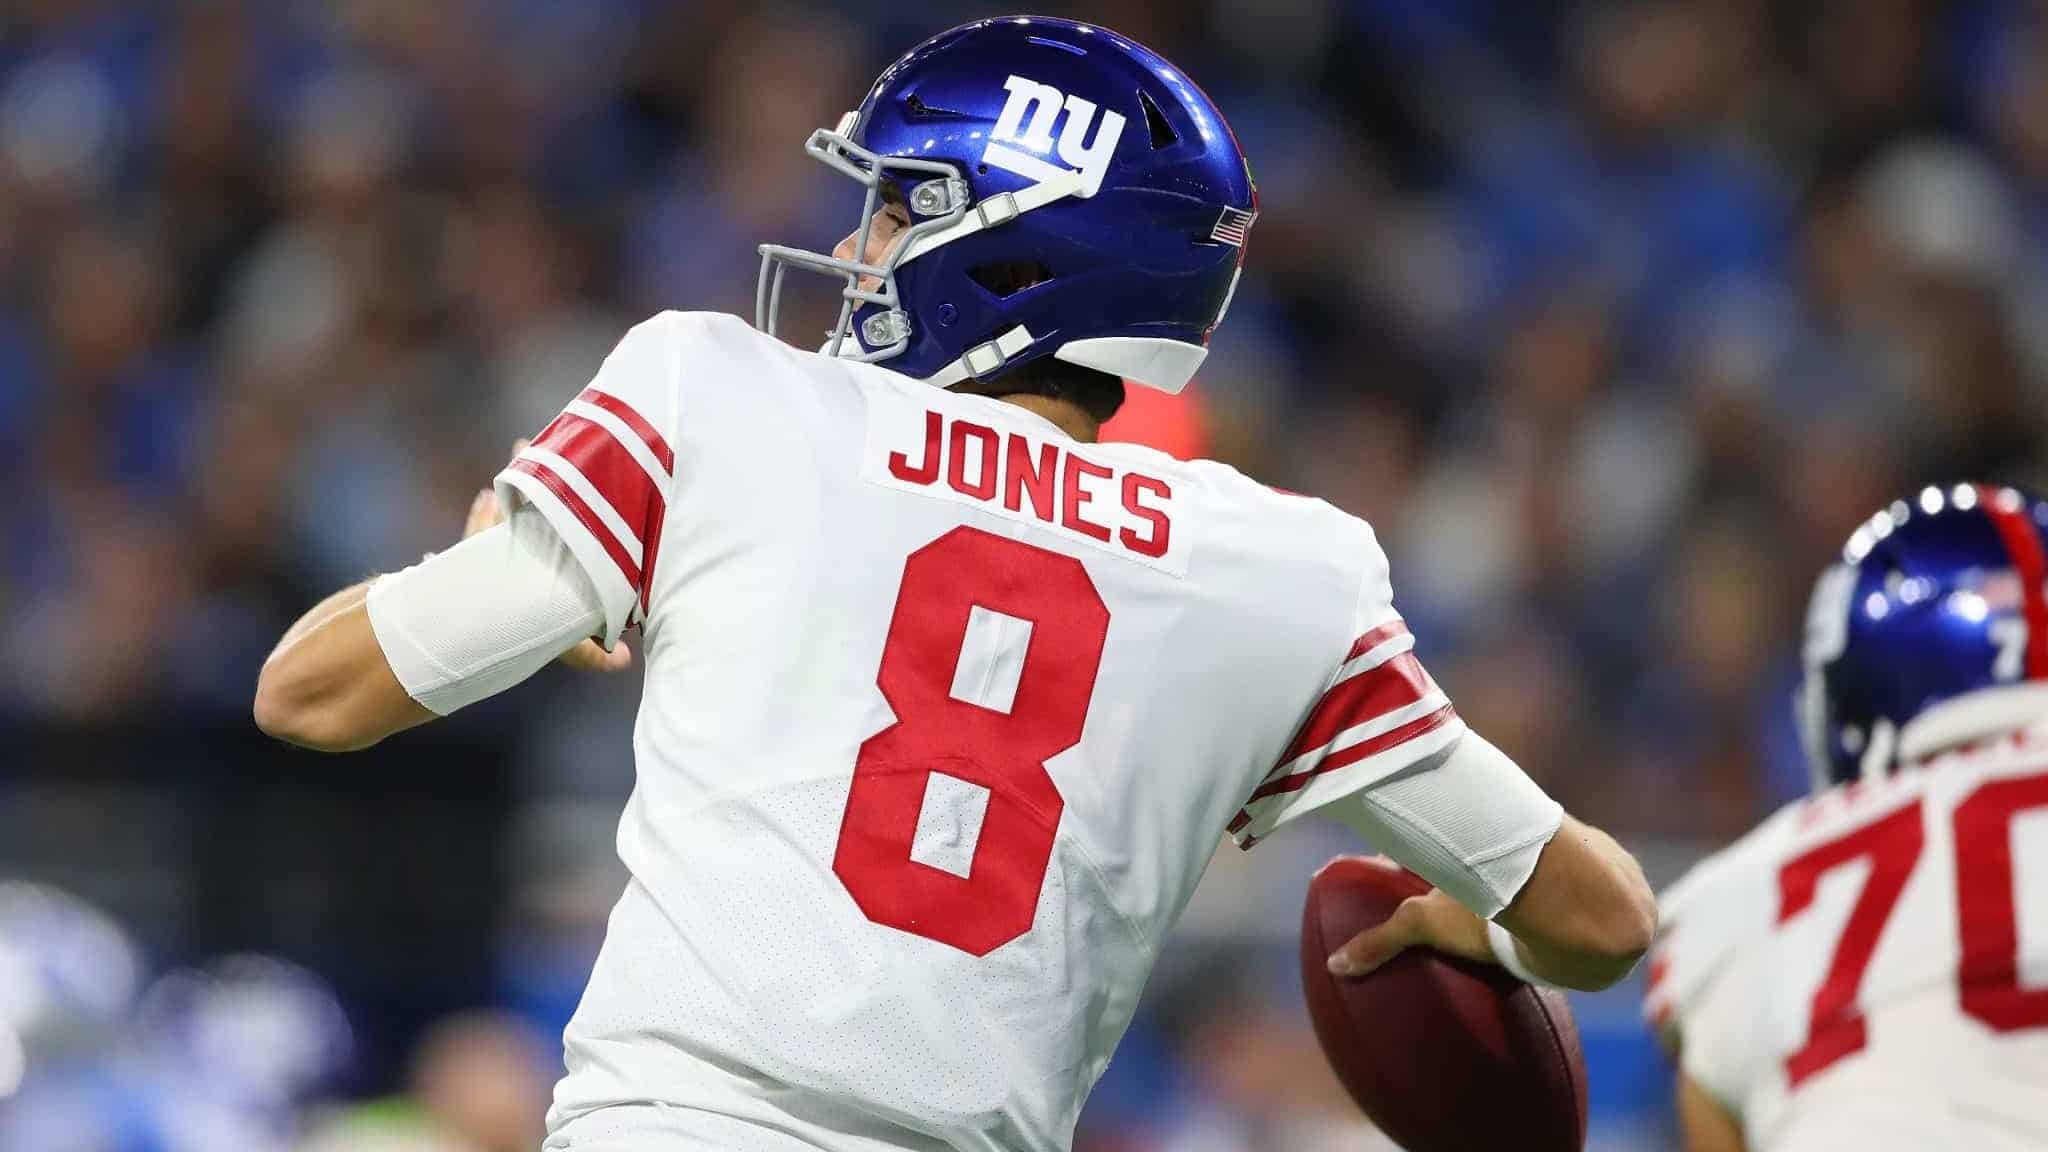 Giants 2021 Schedule Big Blue opens up with Denver, has three prime